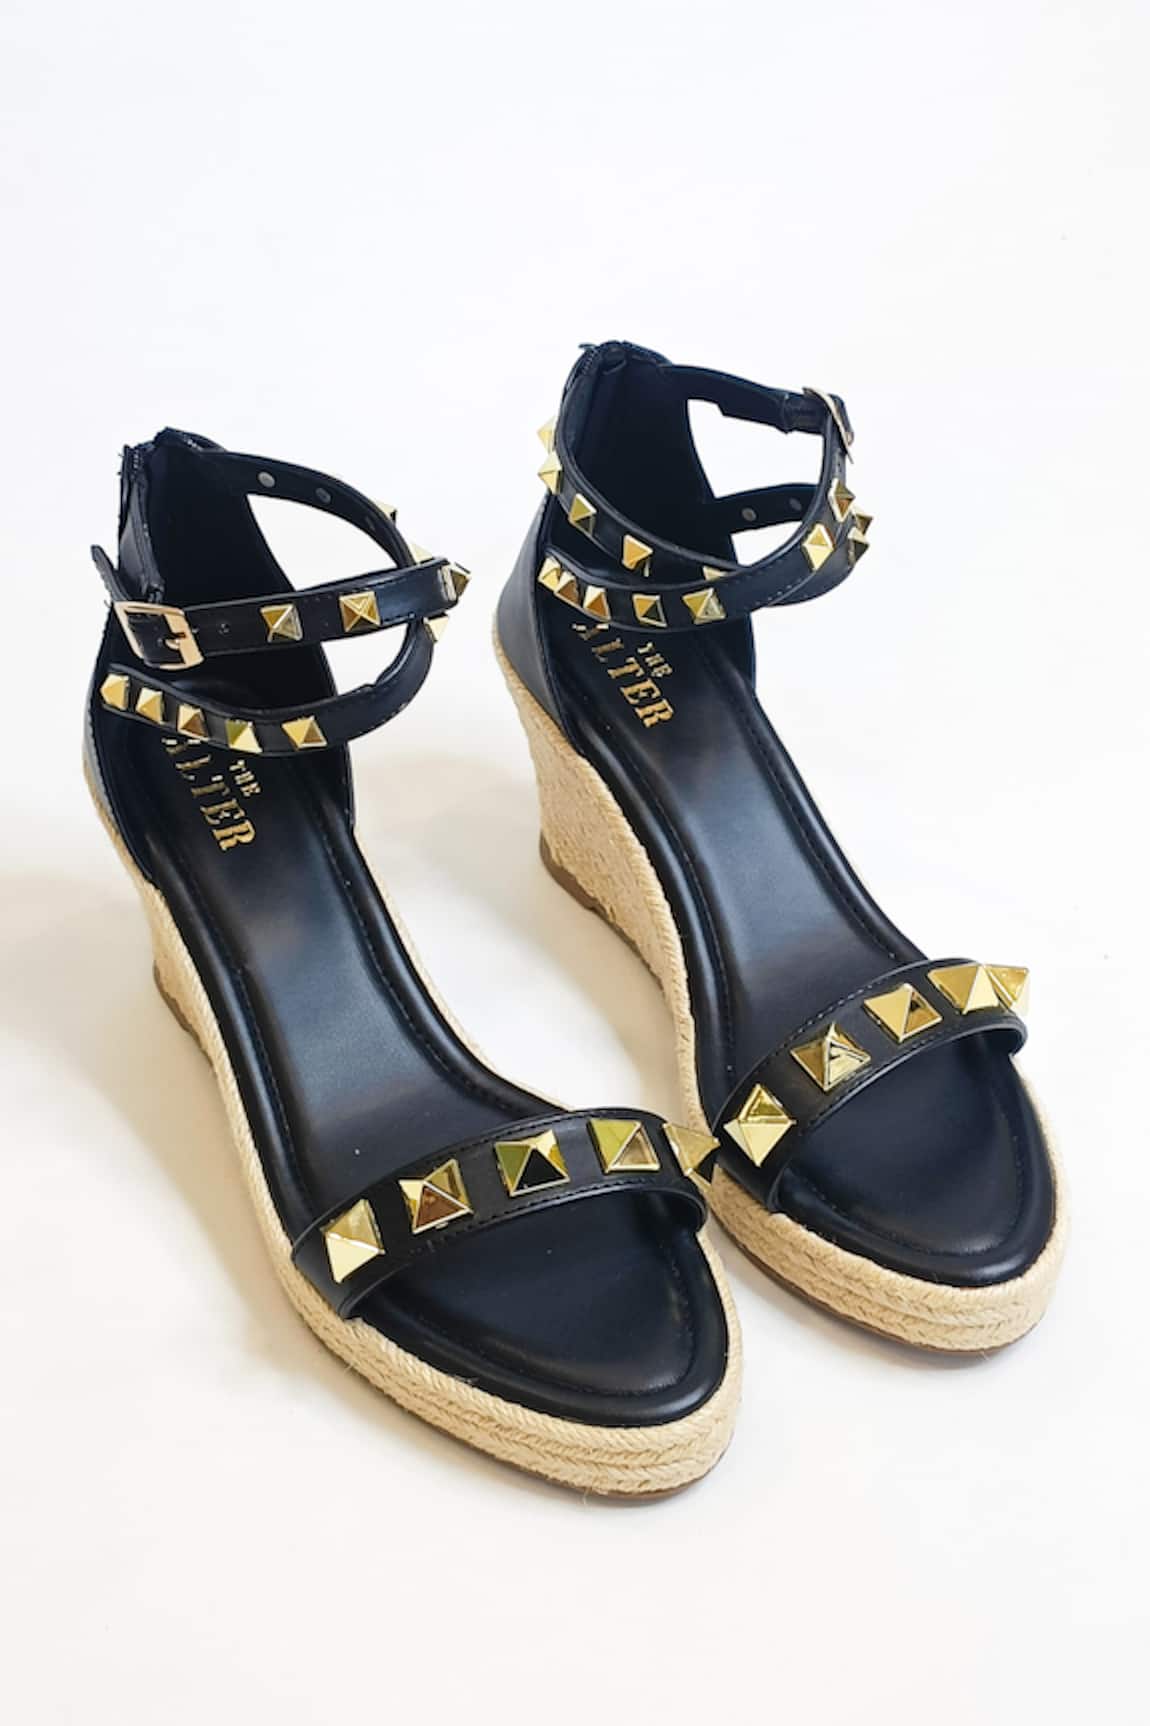 THE ALTER Studded Strappy Wedges